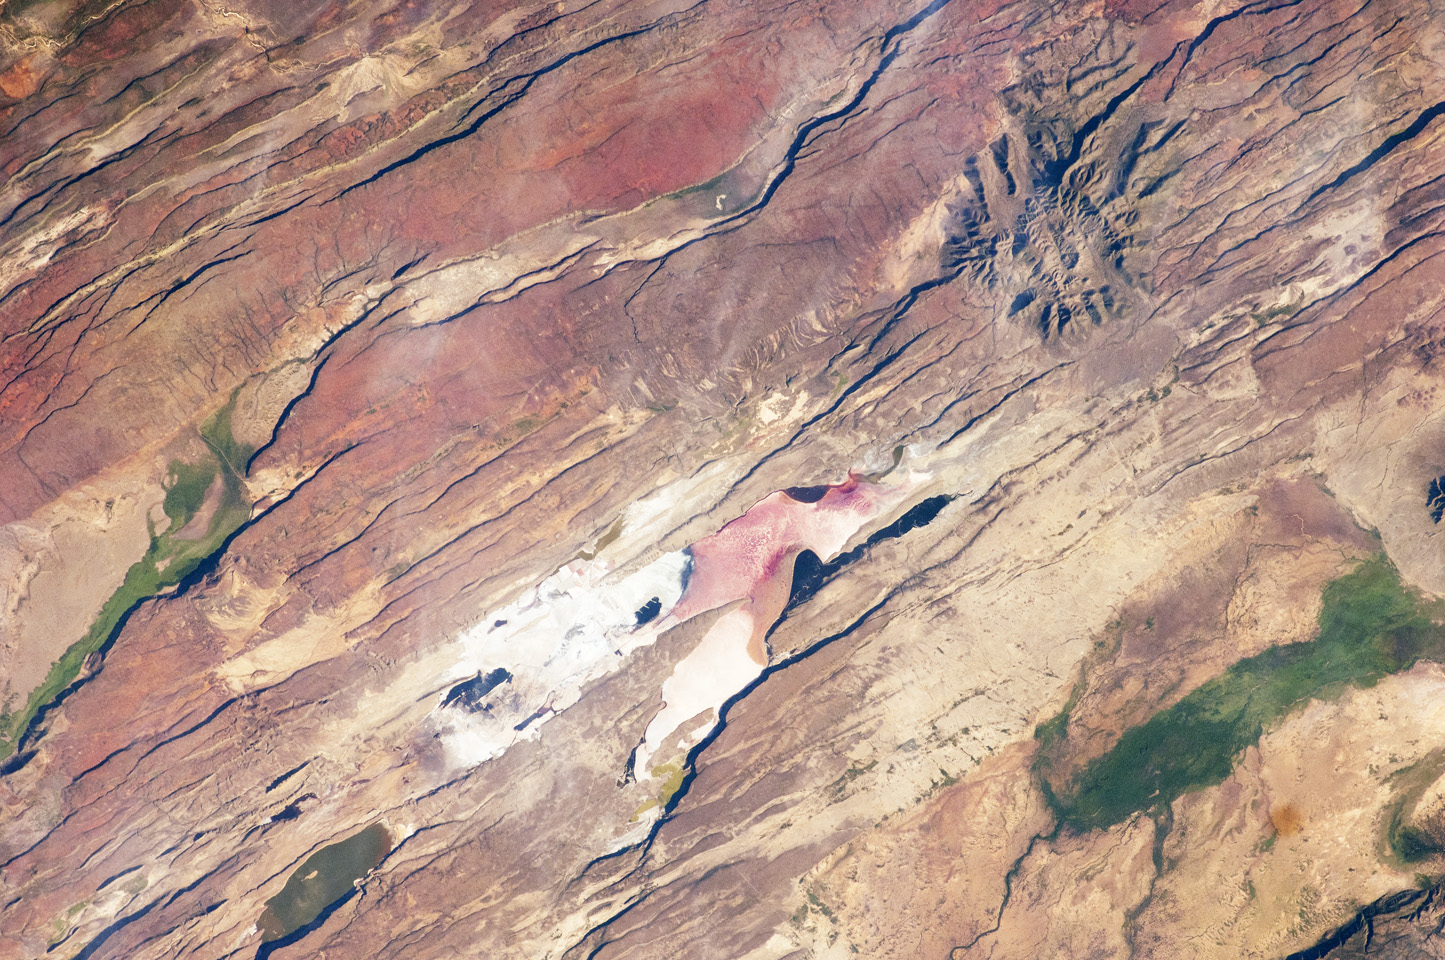 Photograph from space of the East African Rift Valley.